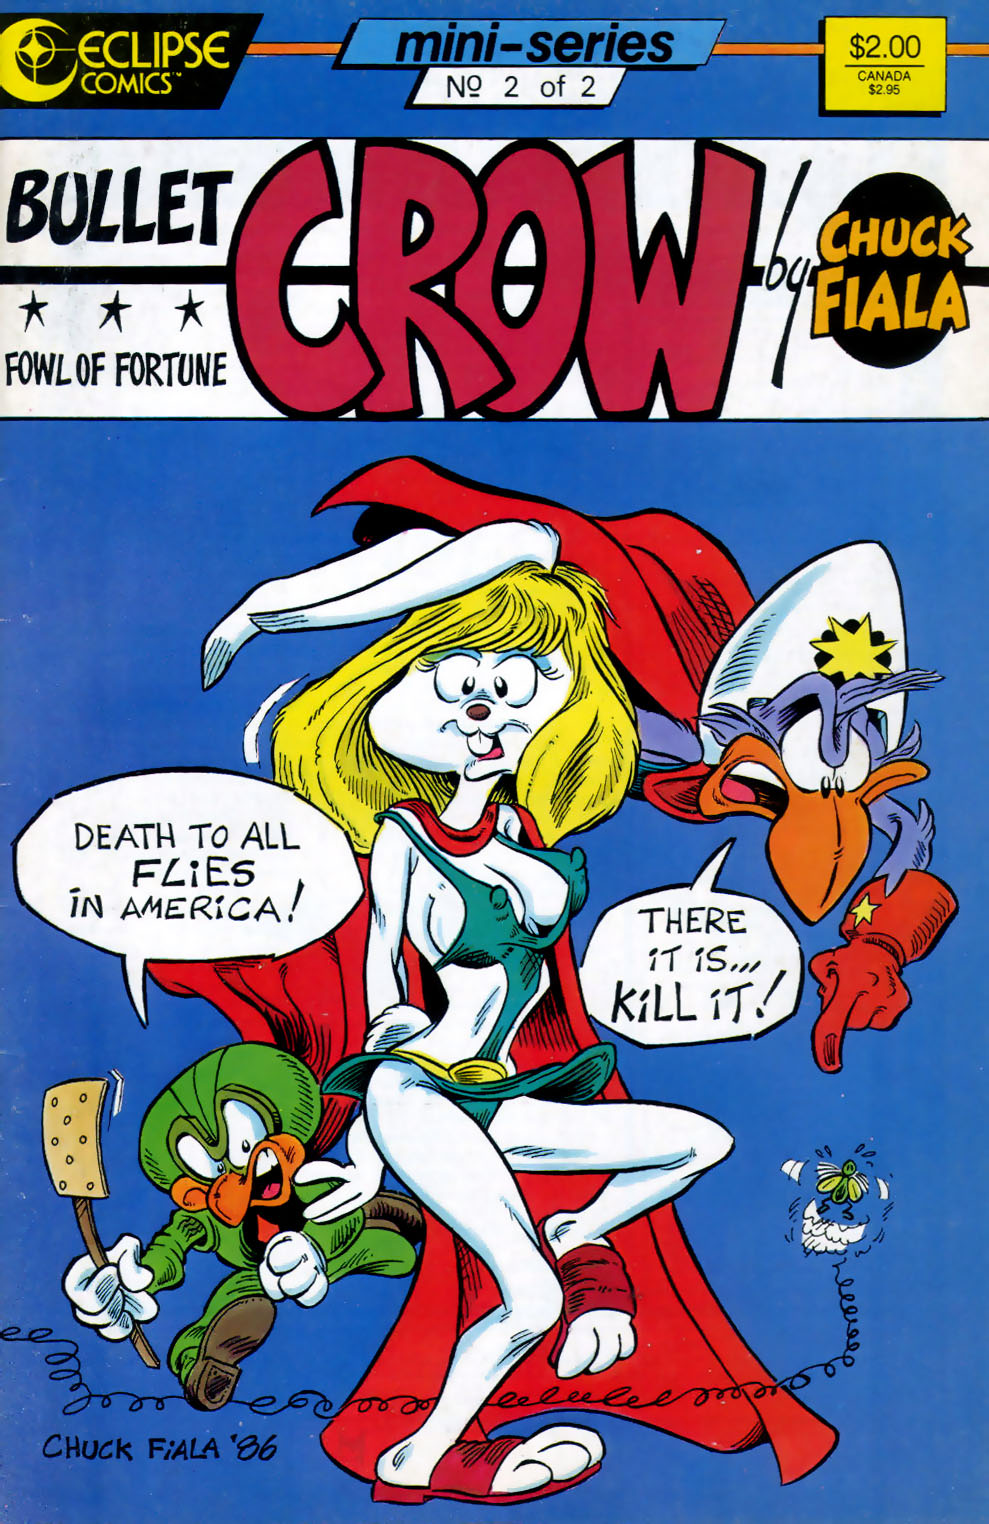 Read online Bullet Crow, Fowl of Fortune comic -  Issue #2 - 1